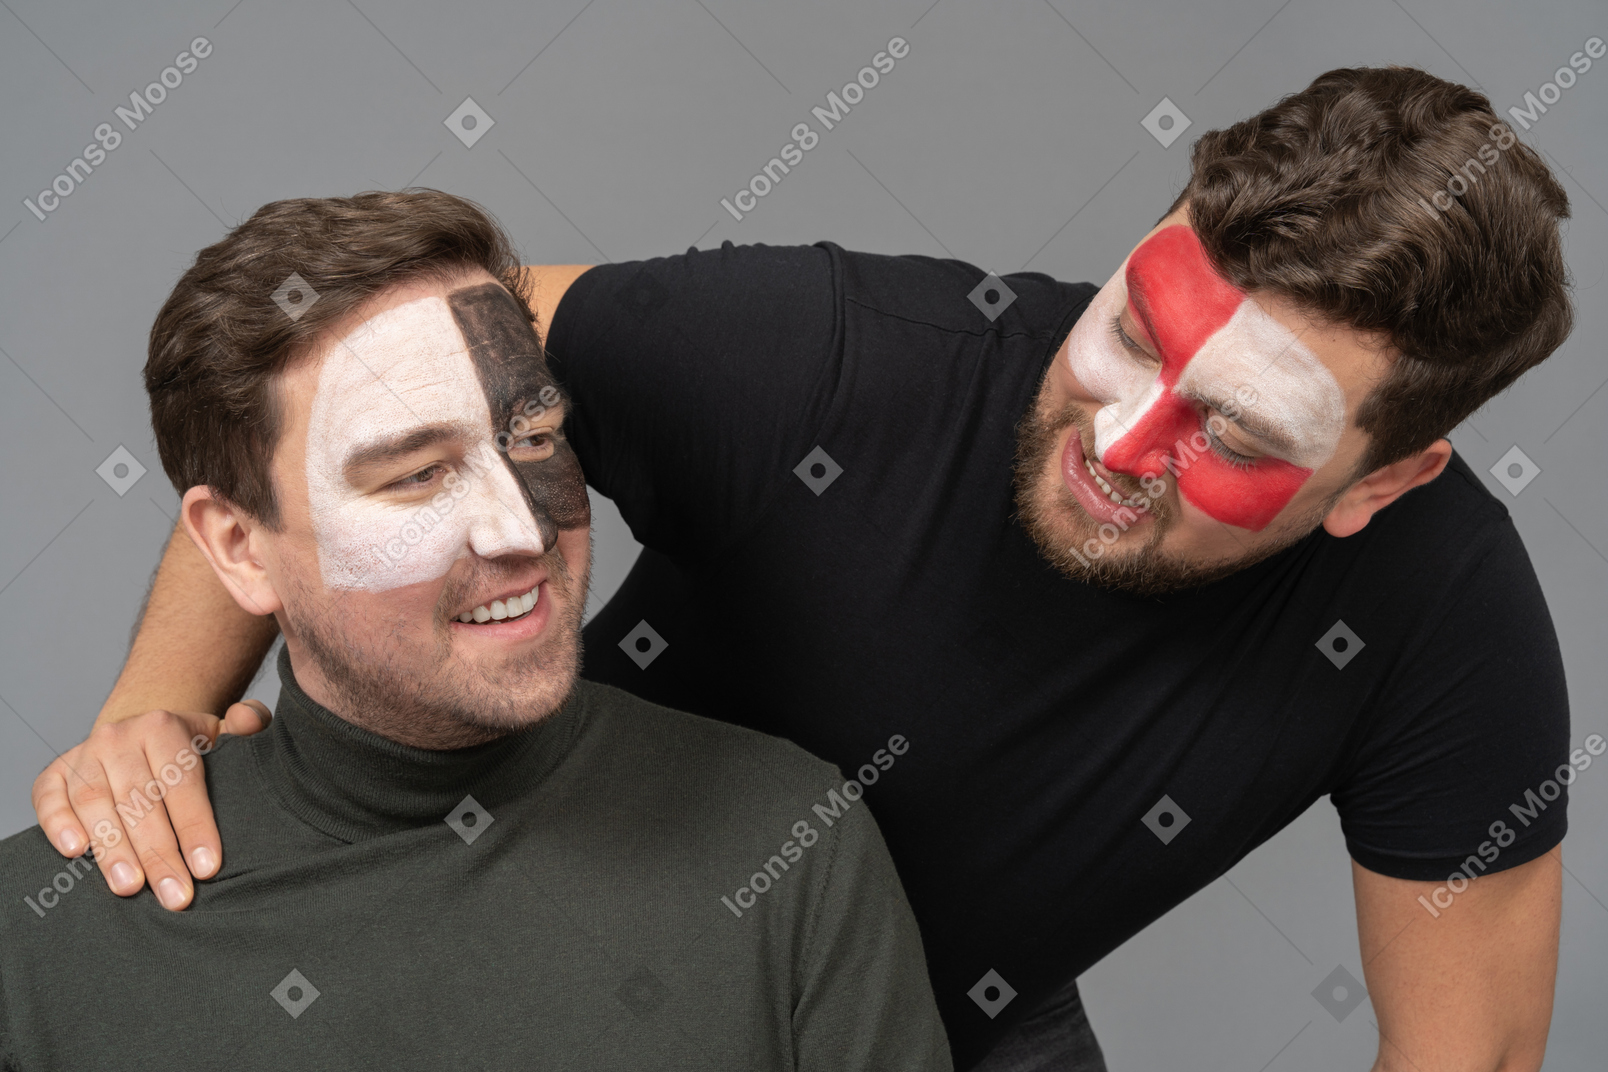 Front view of two cheerful male football fans with face art